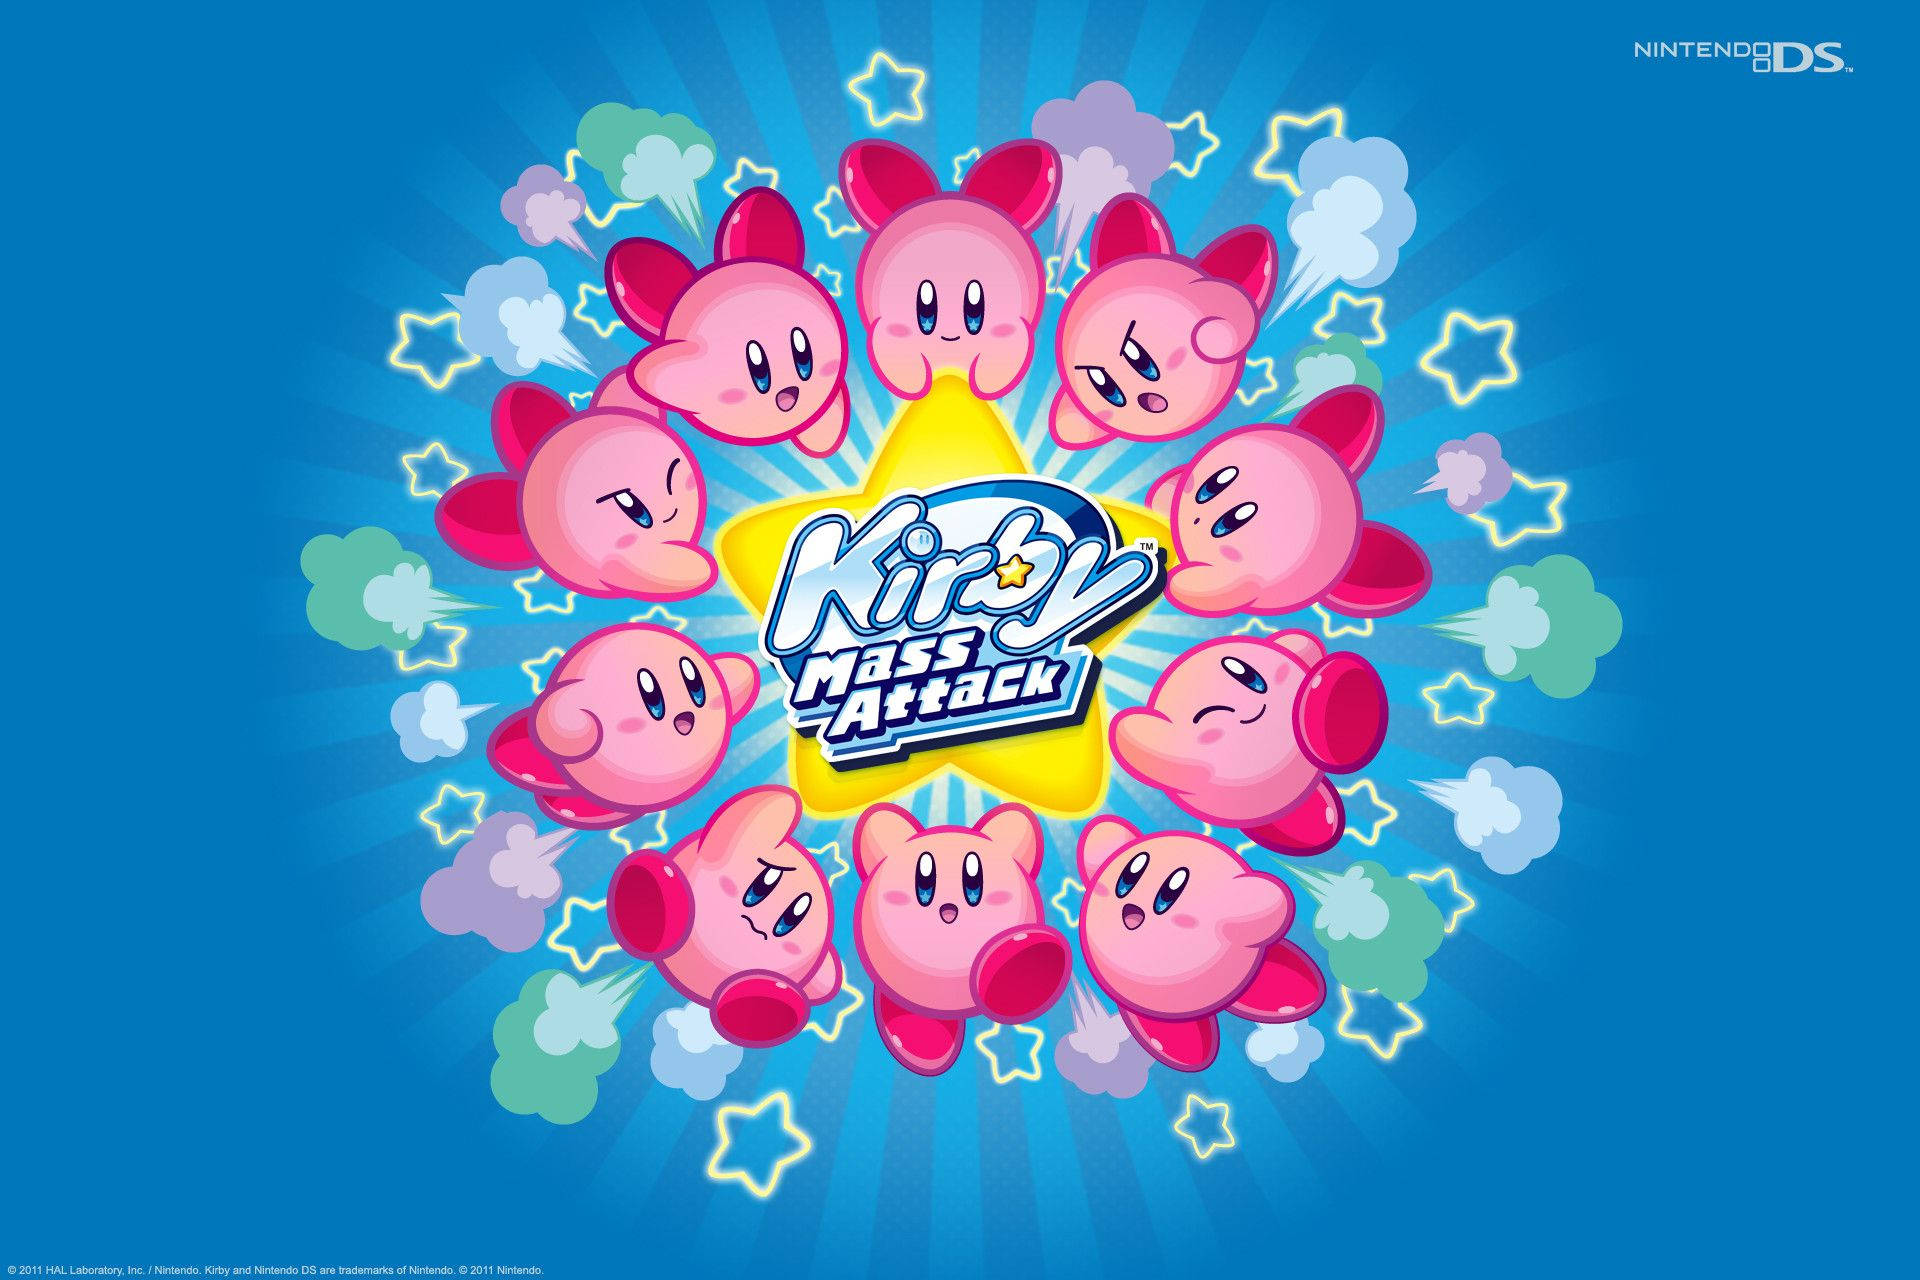 Fun-filled Adventure with Kirby Wallpaper